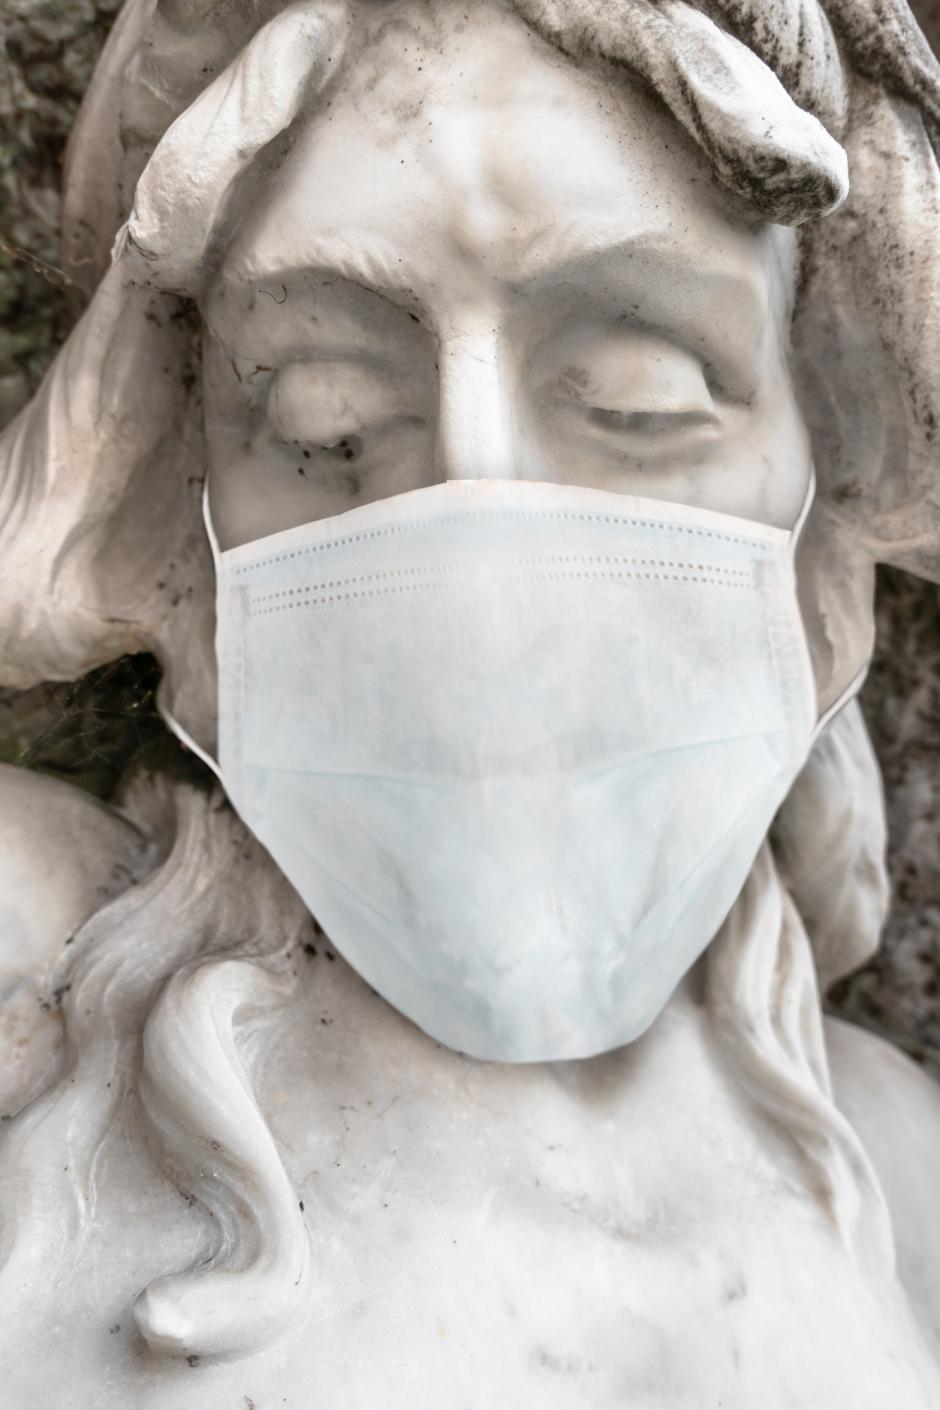 Jesus Christ statue with medical mask. COVID-19 in the world. For coronavirus epidemic concepts.